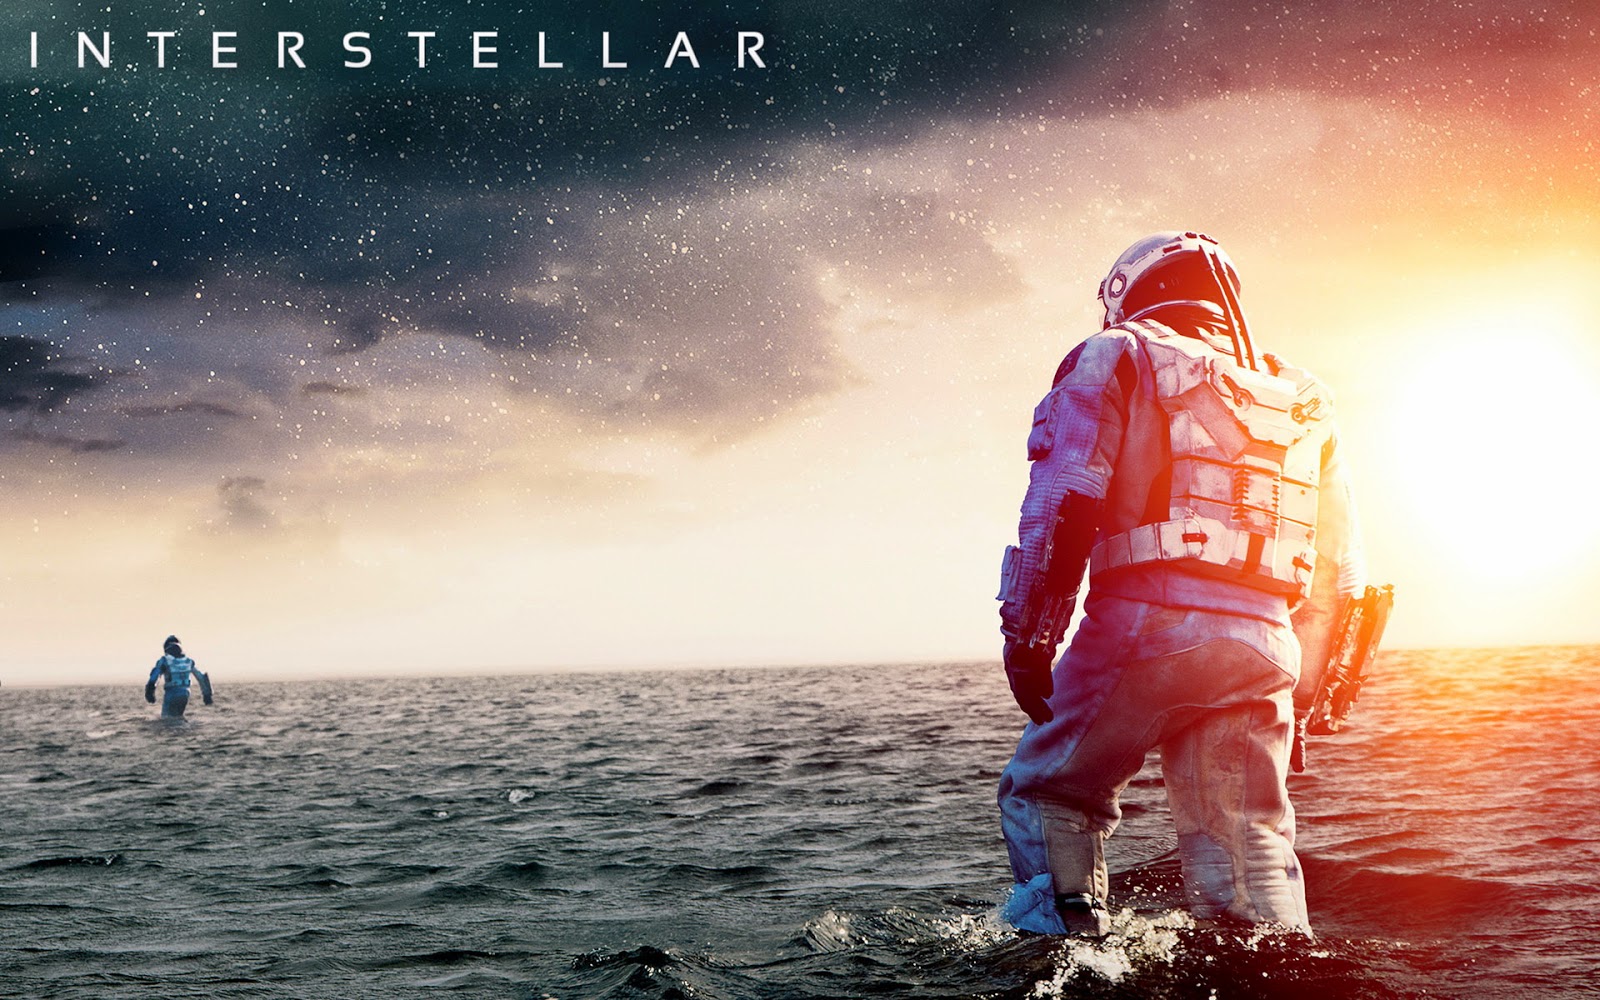 An Interstellar Love Letter To Hans Zimmer Music Without Words